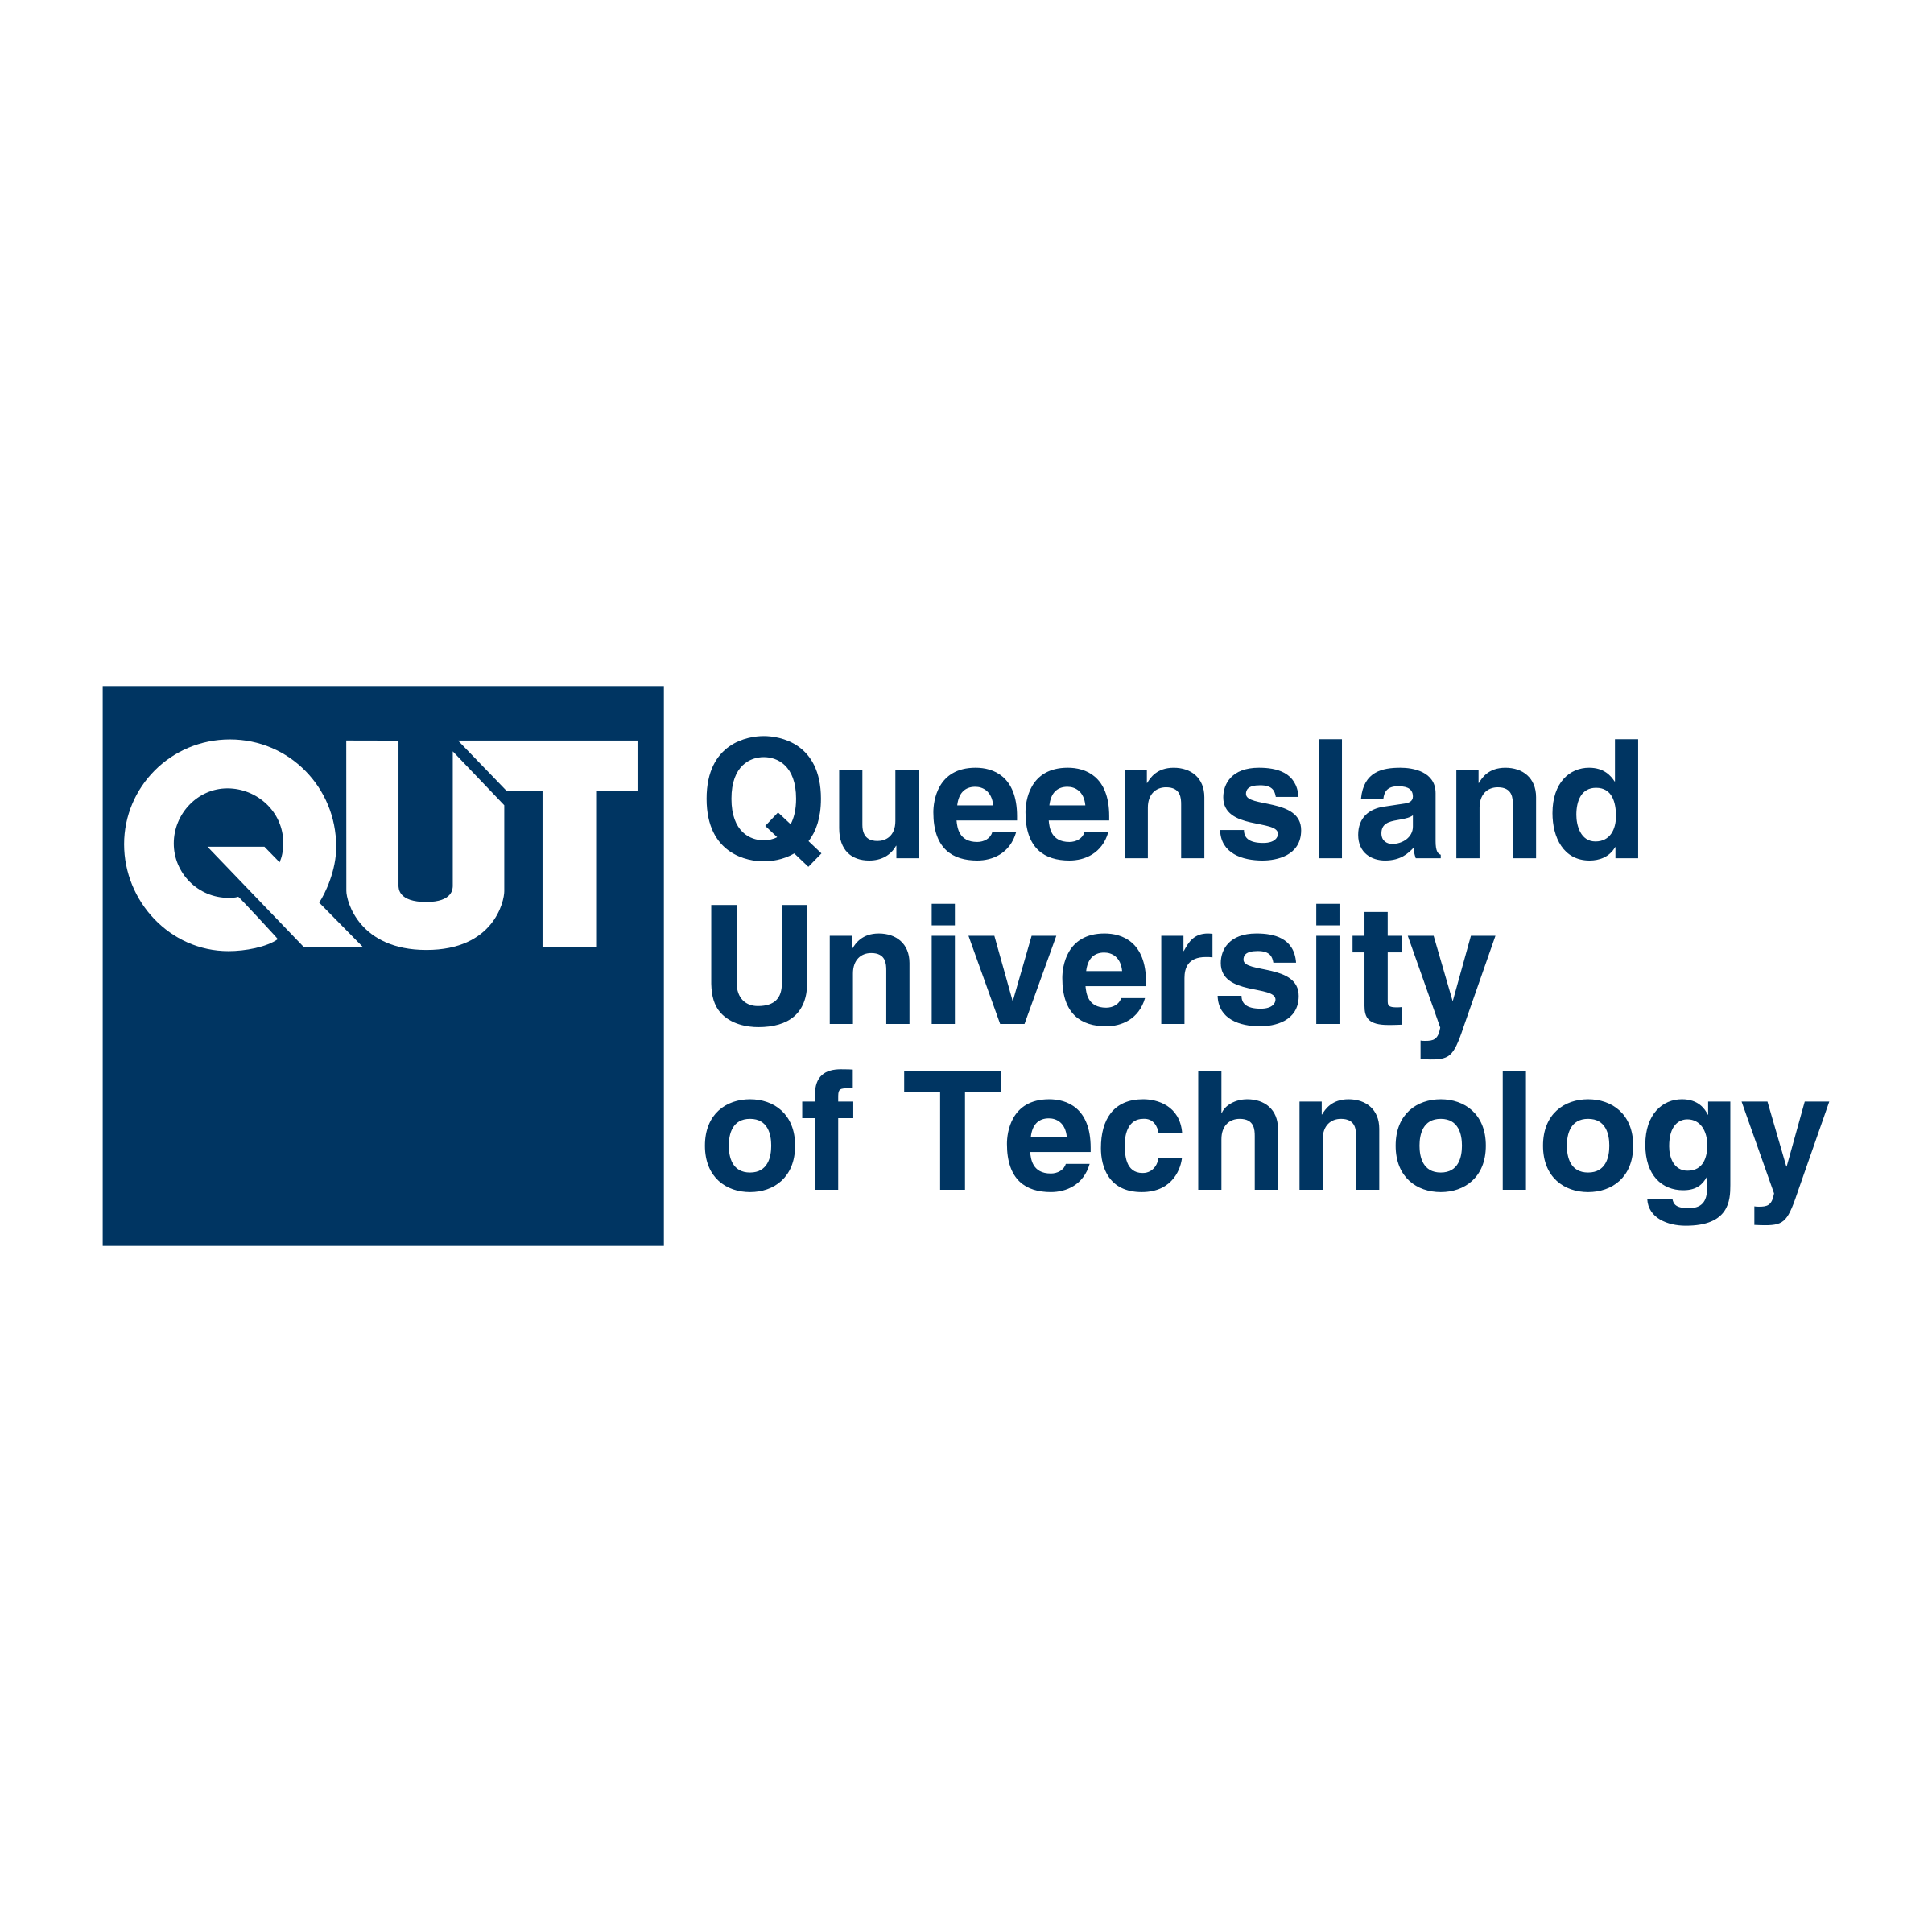 Graduate Certificate in Business (Accounting) | Graduate diploma / certificate | Business | On Campus | 6 months | Queensland University of Technology | Australia